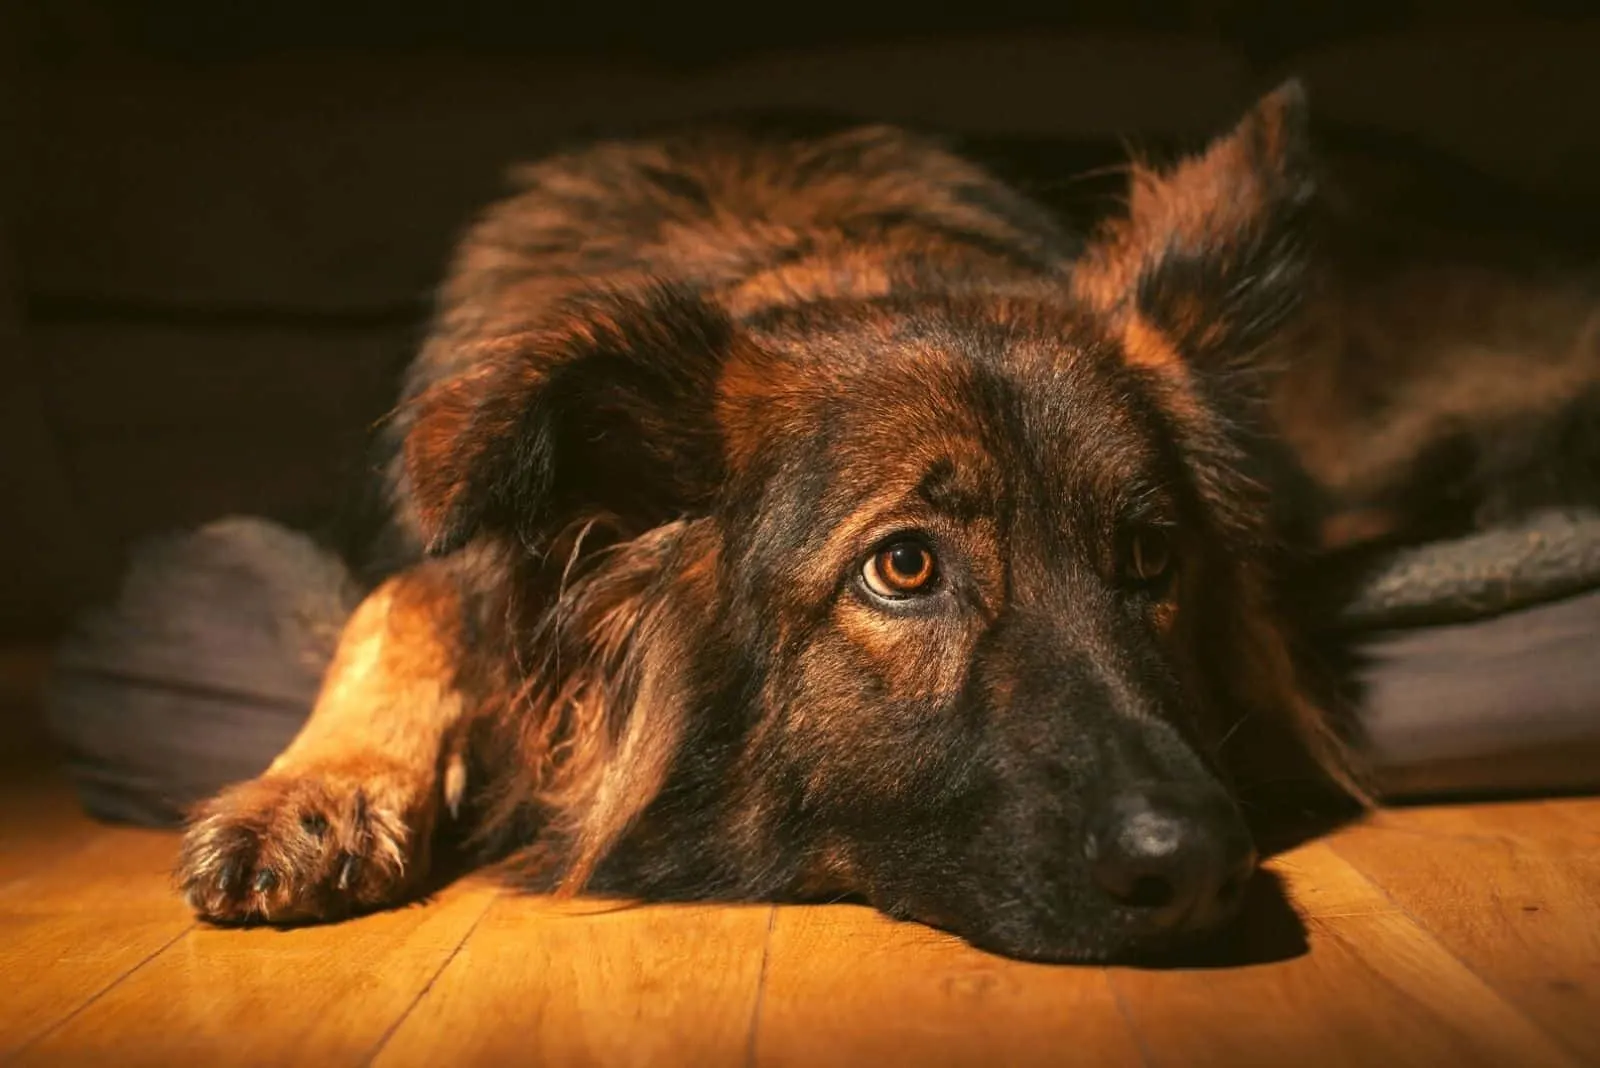 Relaxed German Shepherd Dog laid on his bed indoors on a wooden floor, lit with torch